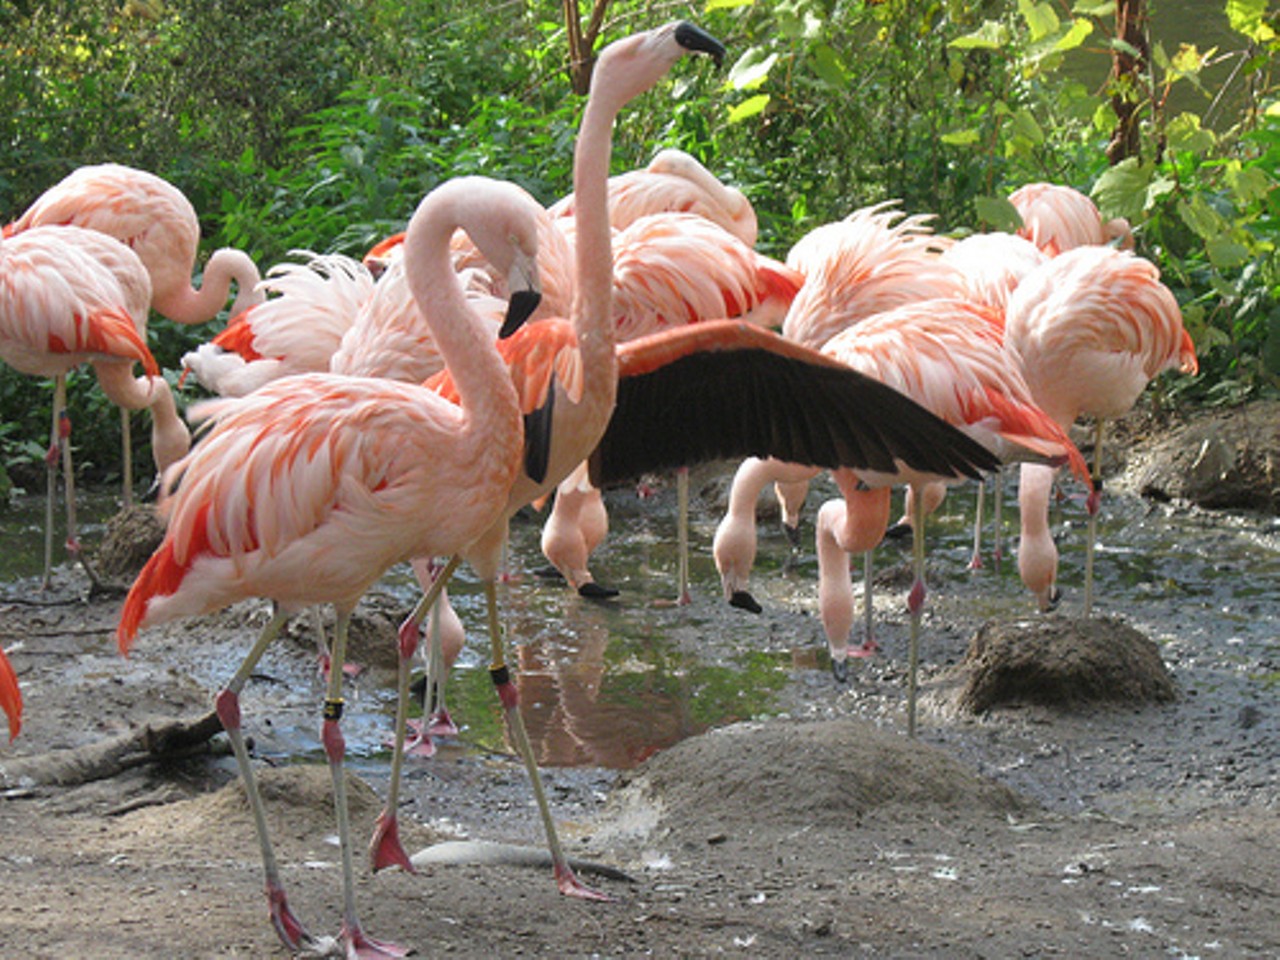 And aren't these flamingos at the zoo just absolutely dashing?